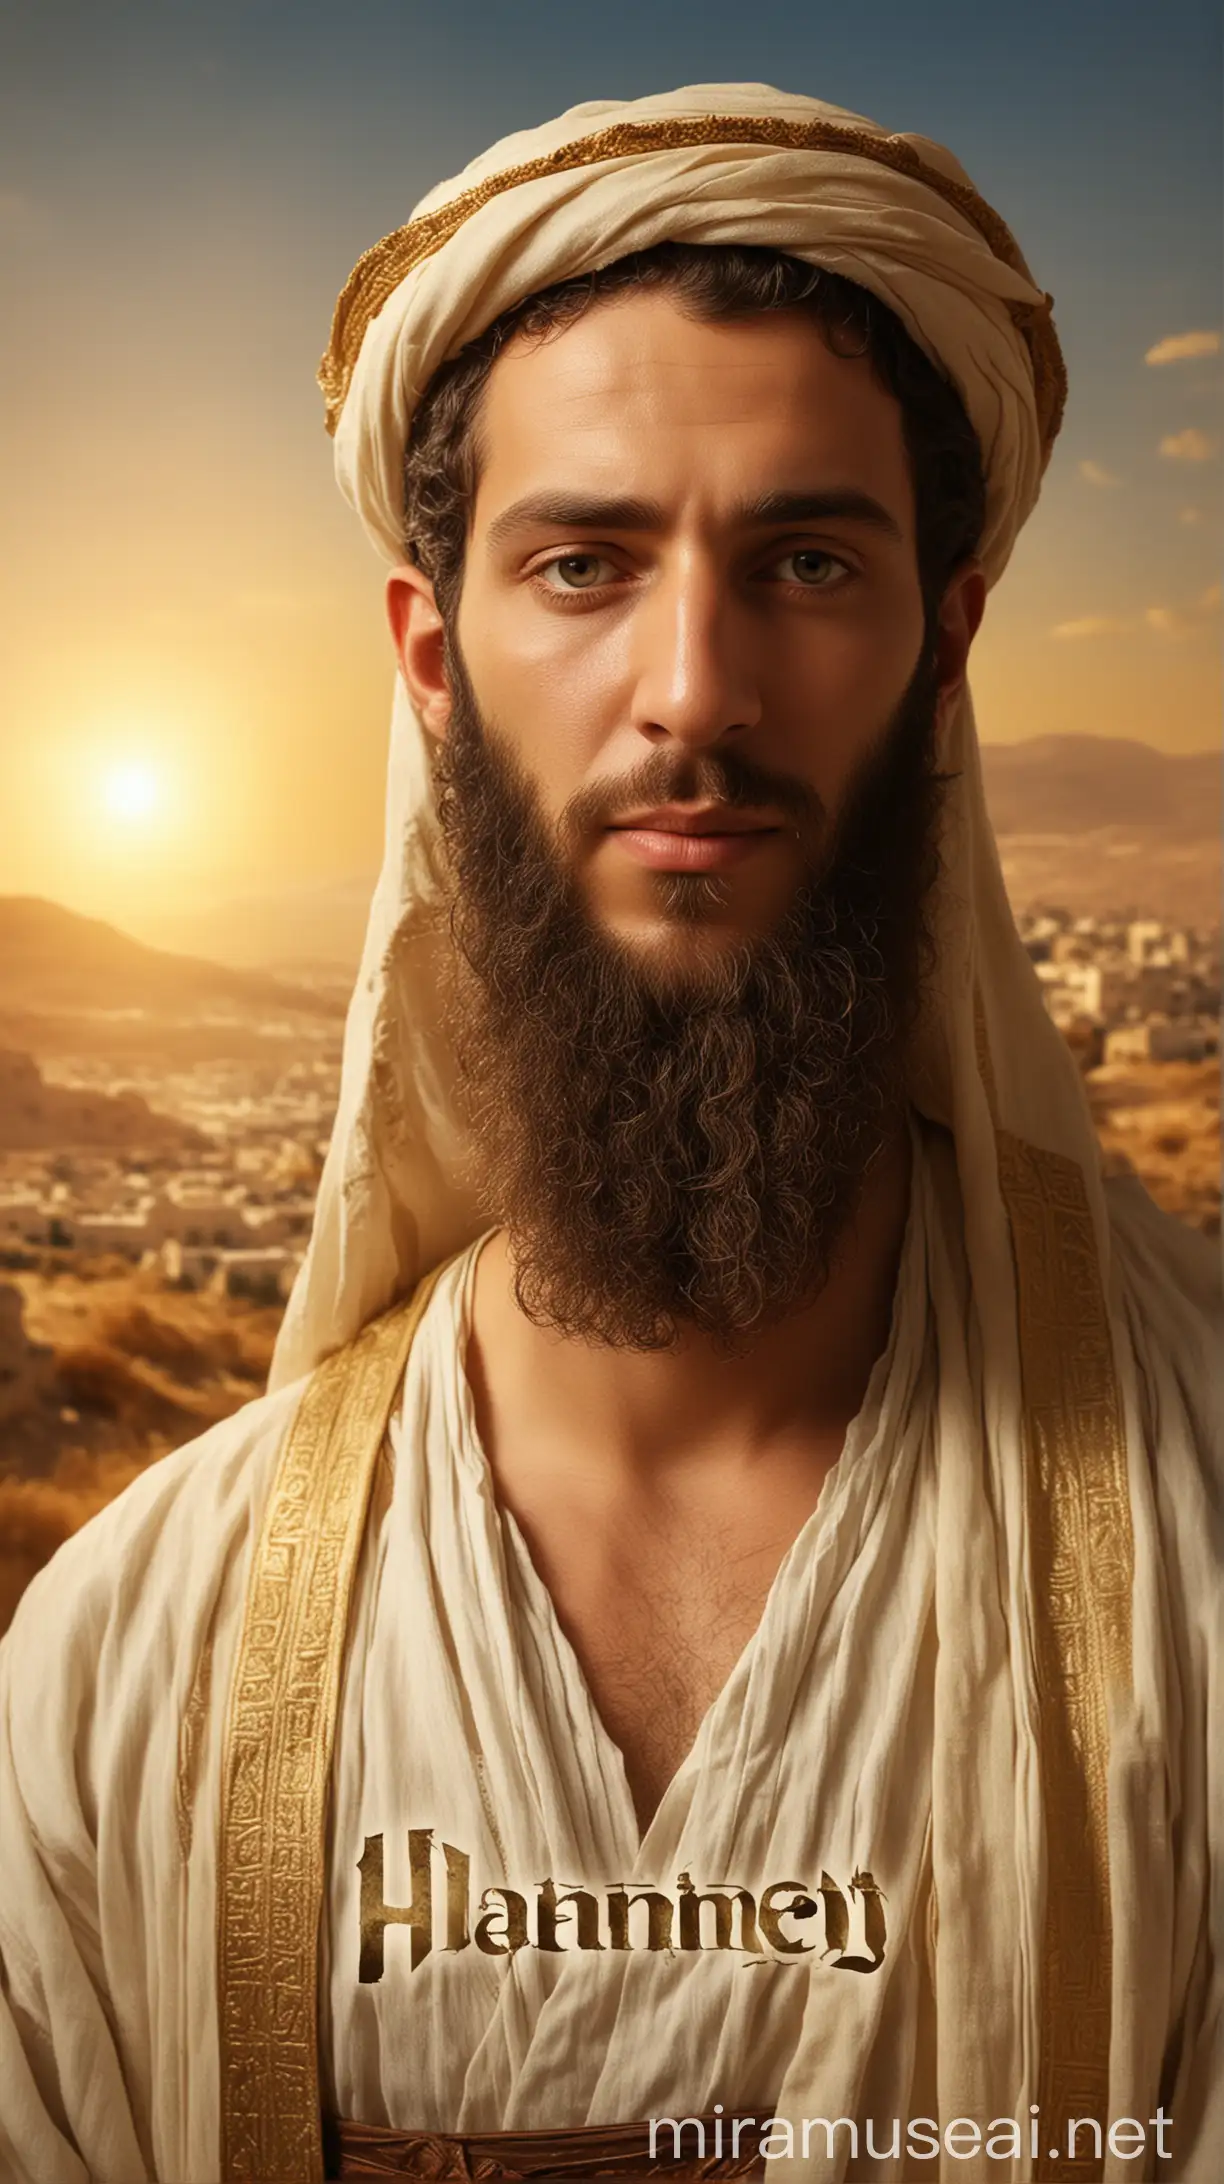 Hanameel Dignified Ancient Hebrew Man Bathed in Divine Light